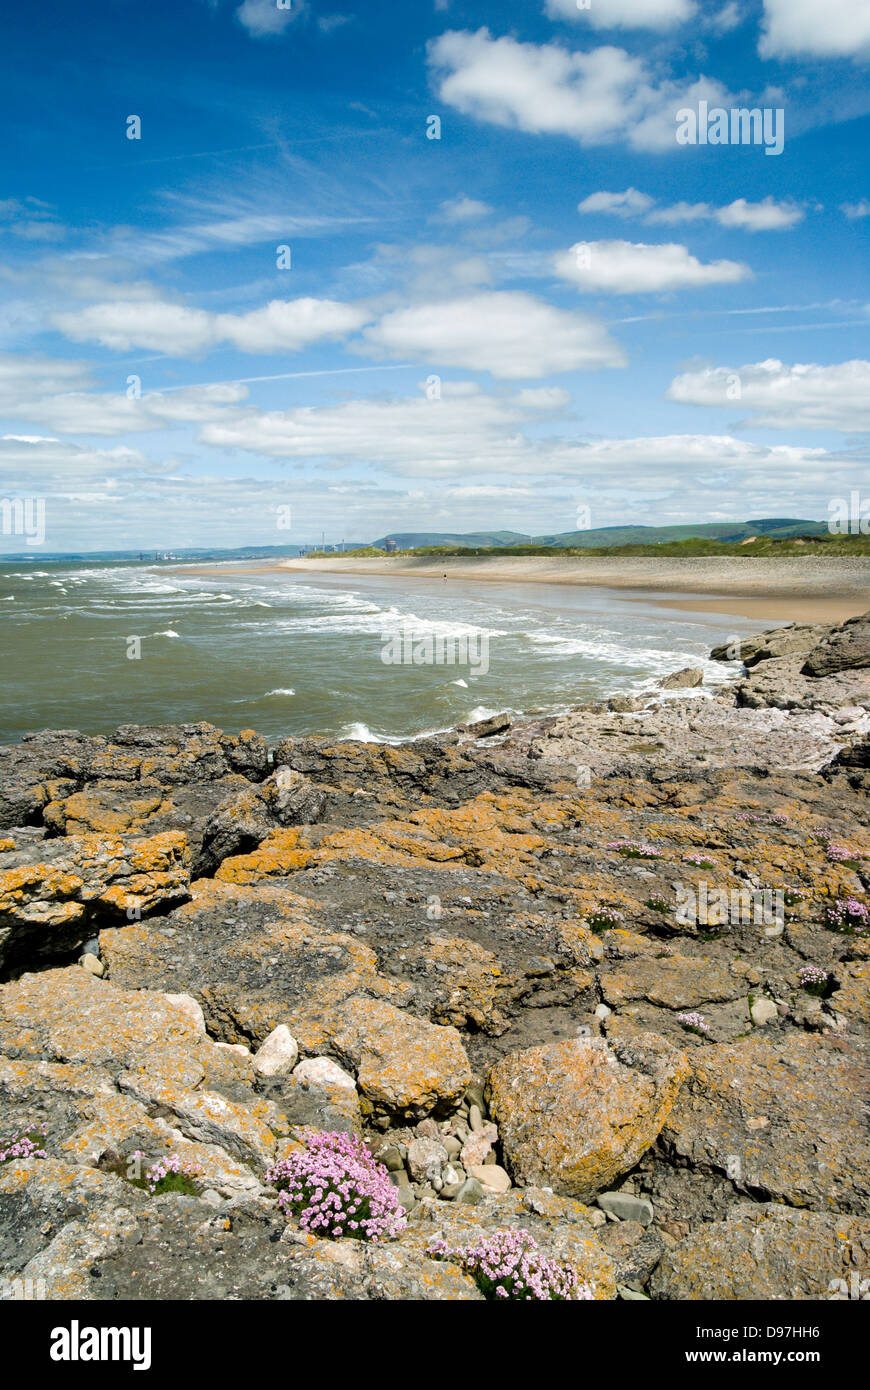 sker sands, kenfig near porthcawl south wales Stock Photo